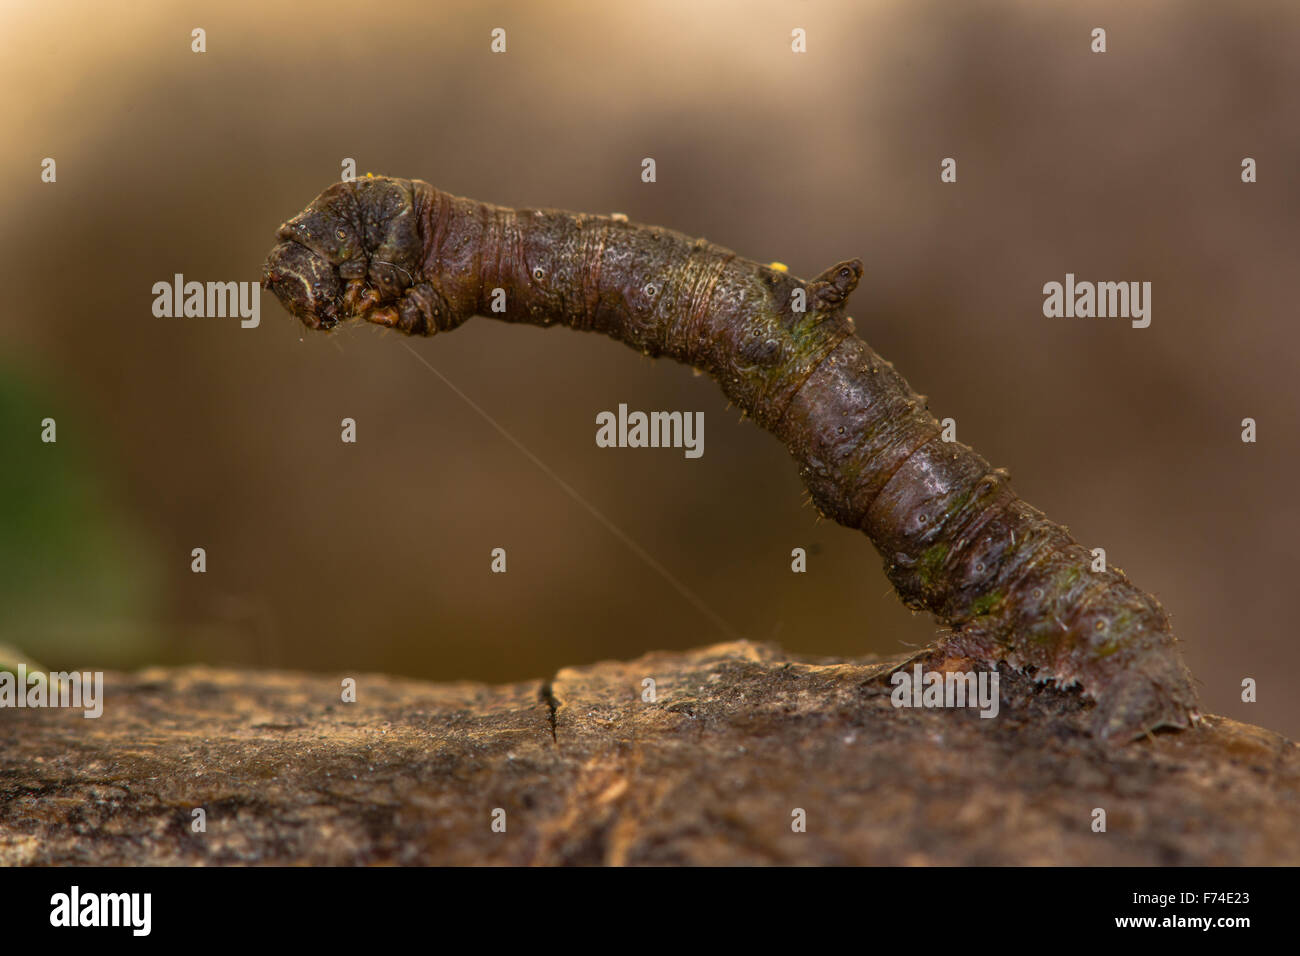 Brimstone (Opisthograptis luteolata) caterpillar (brown form) camouflaged on a twig Stock Photo